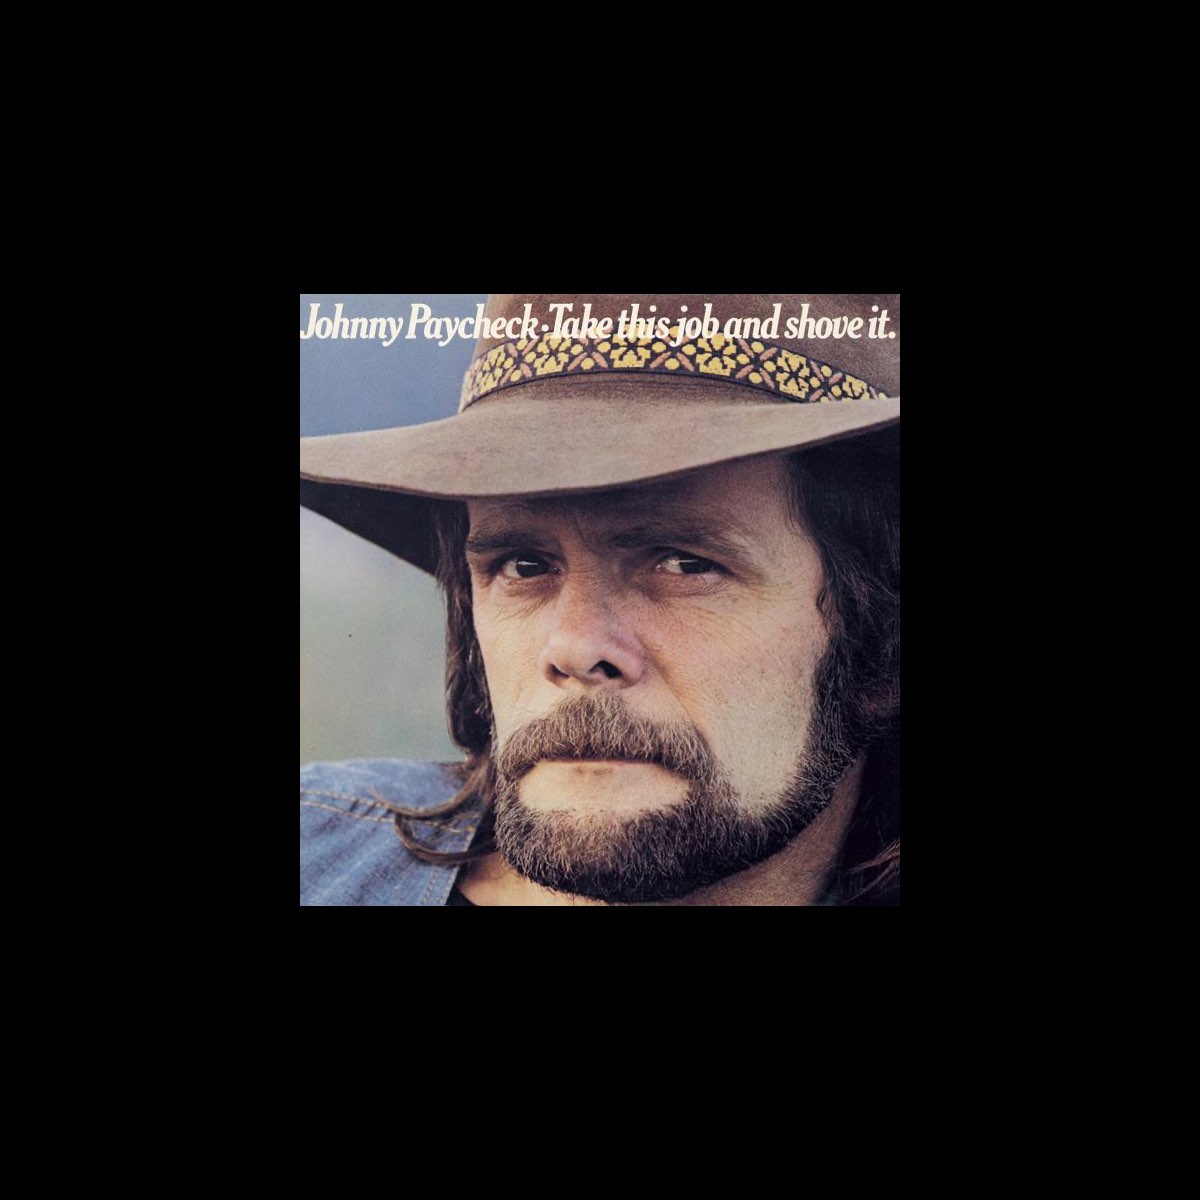 ‎Take This Job and Shove It - Album by Johnny Paycheck - Apple Music